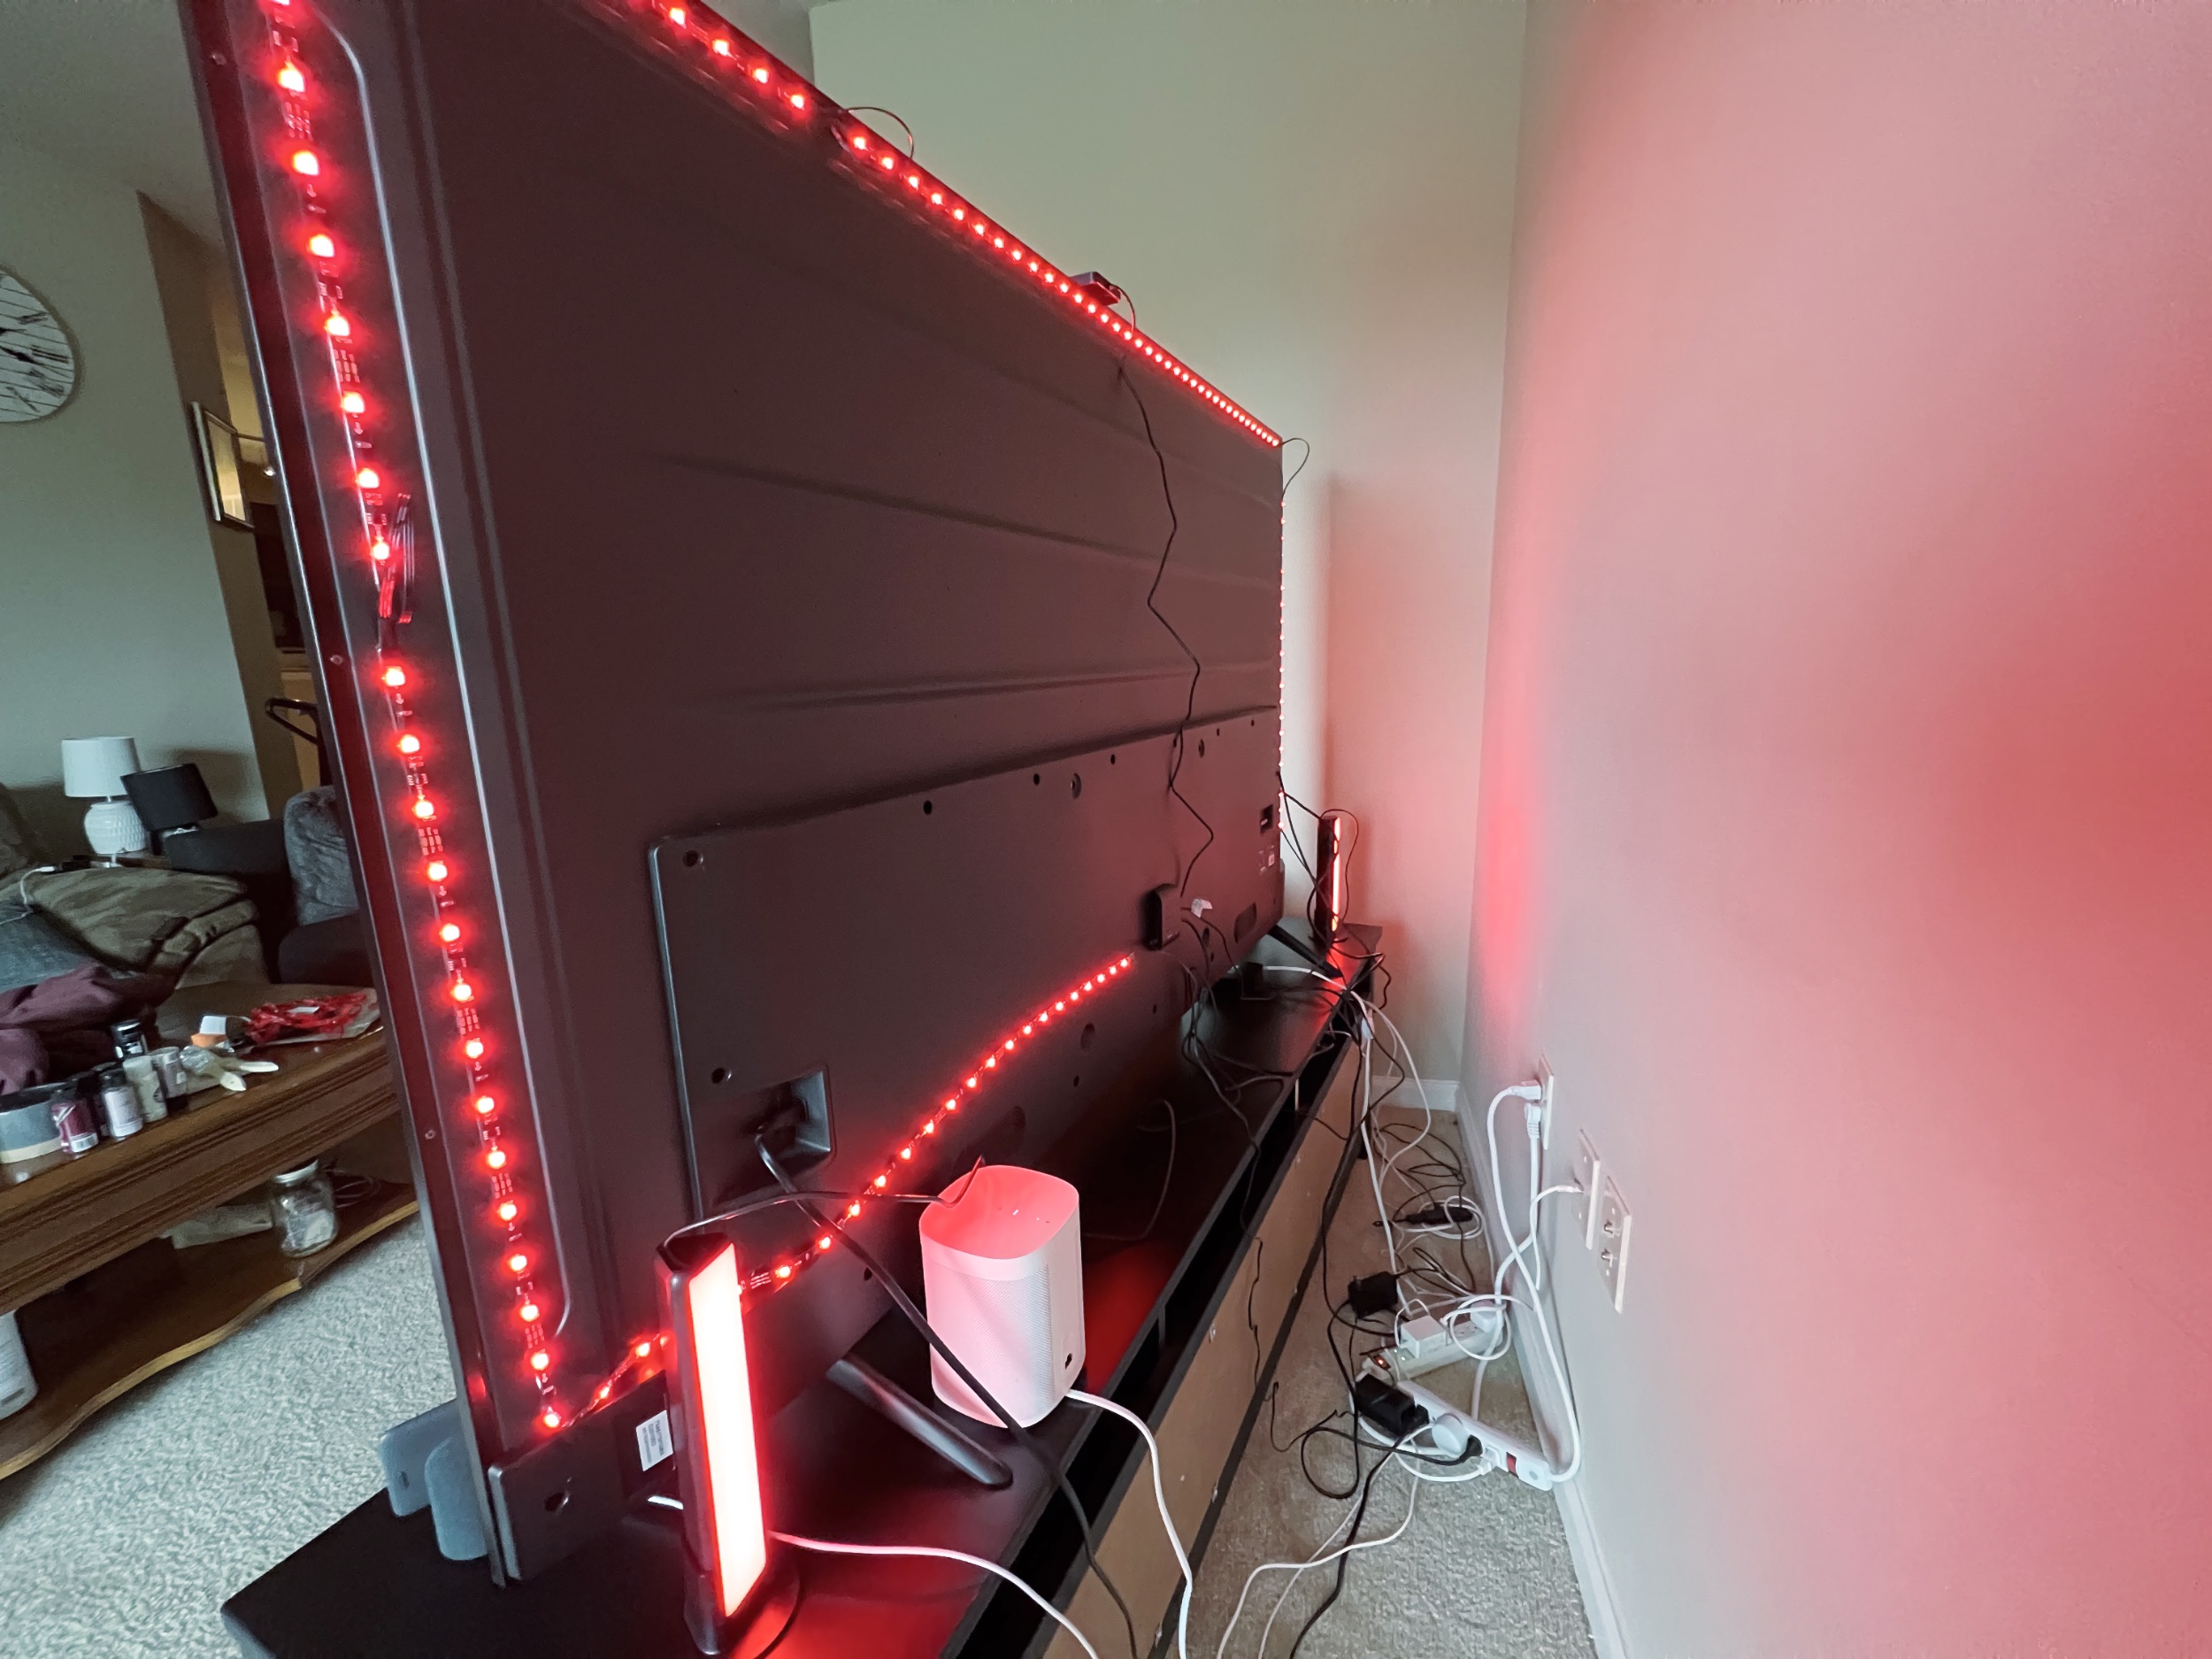 Govee LED Strip Lights  Take Your Display to The Next Level